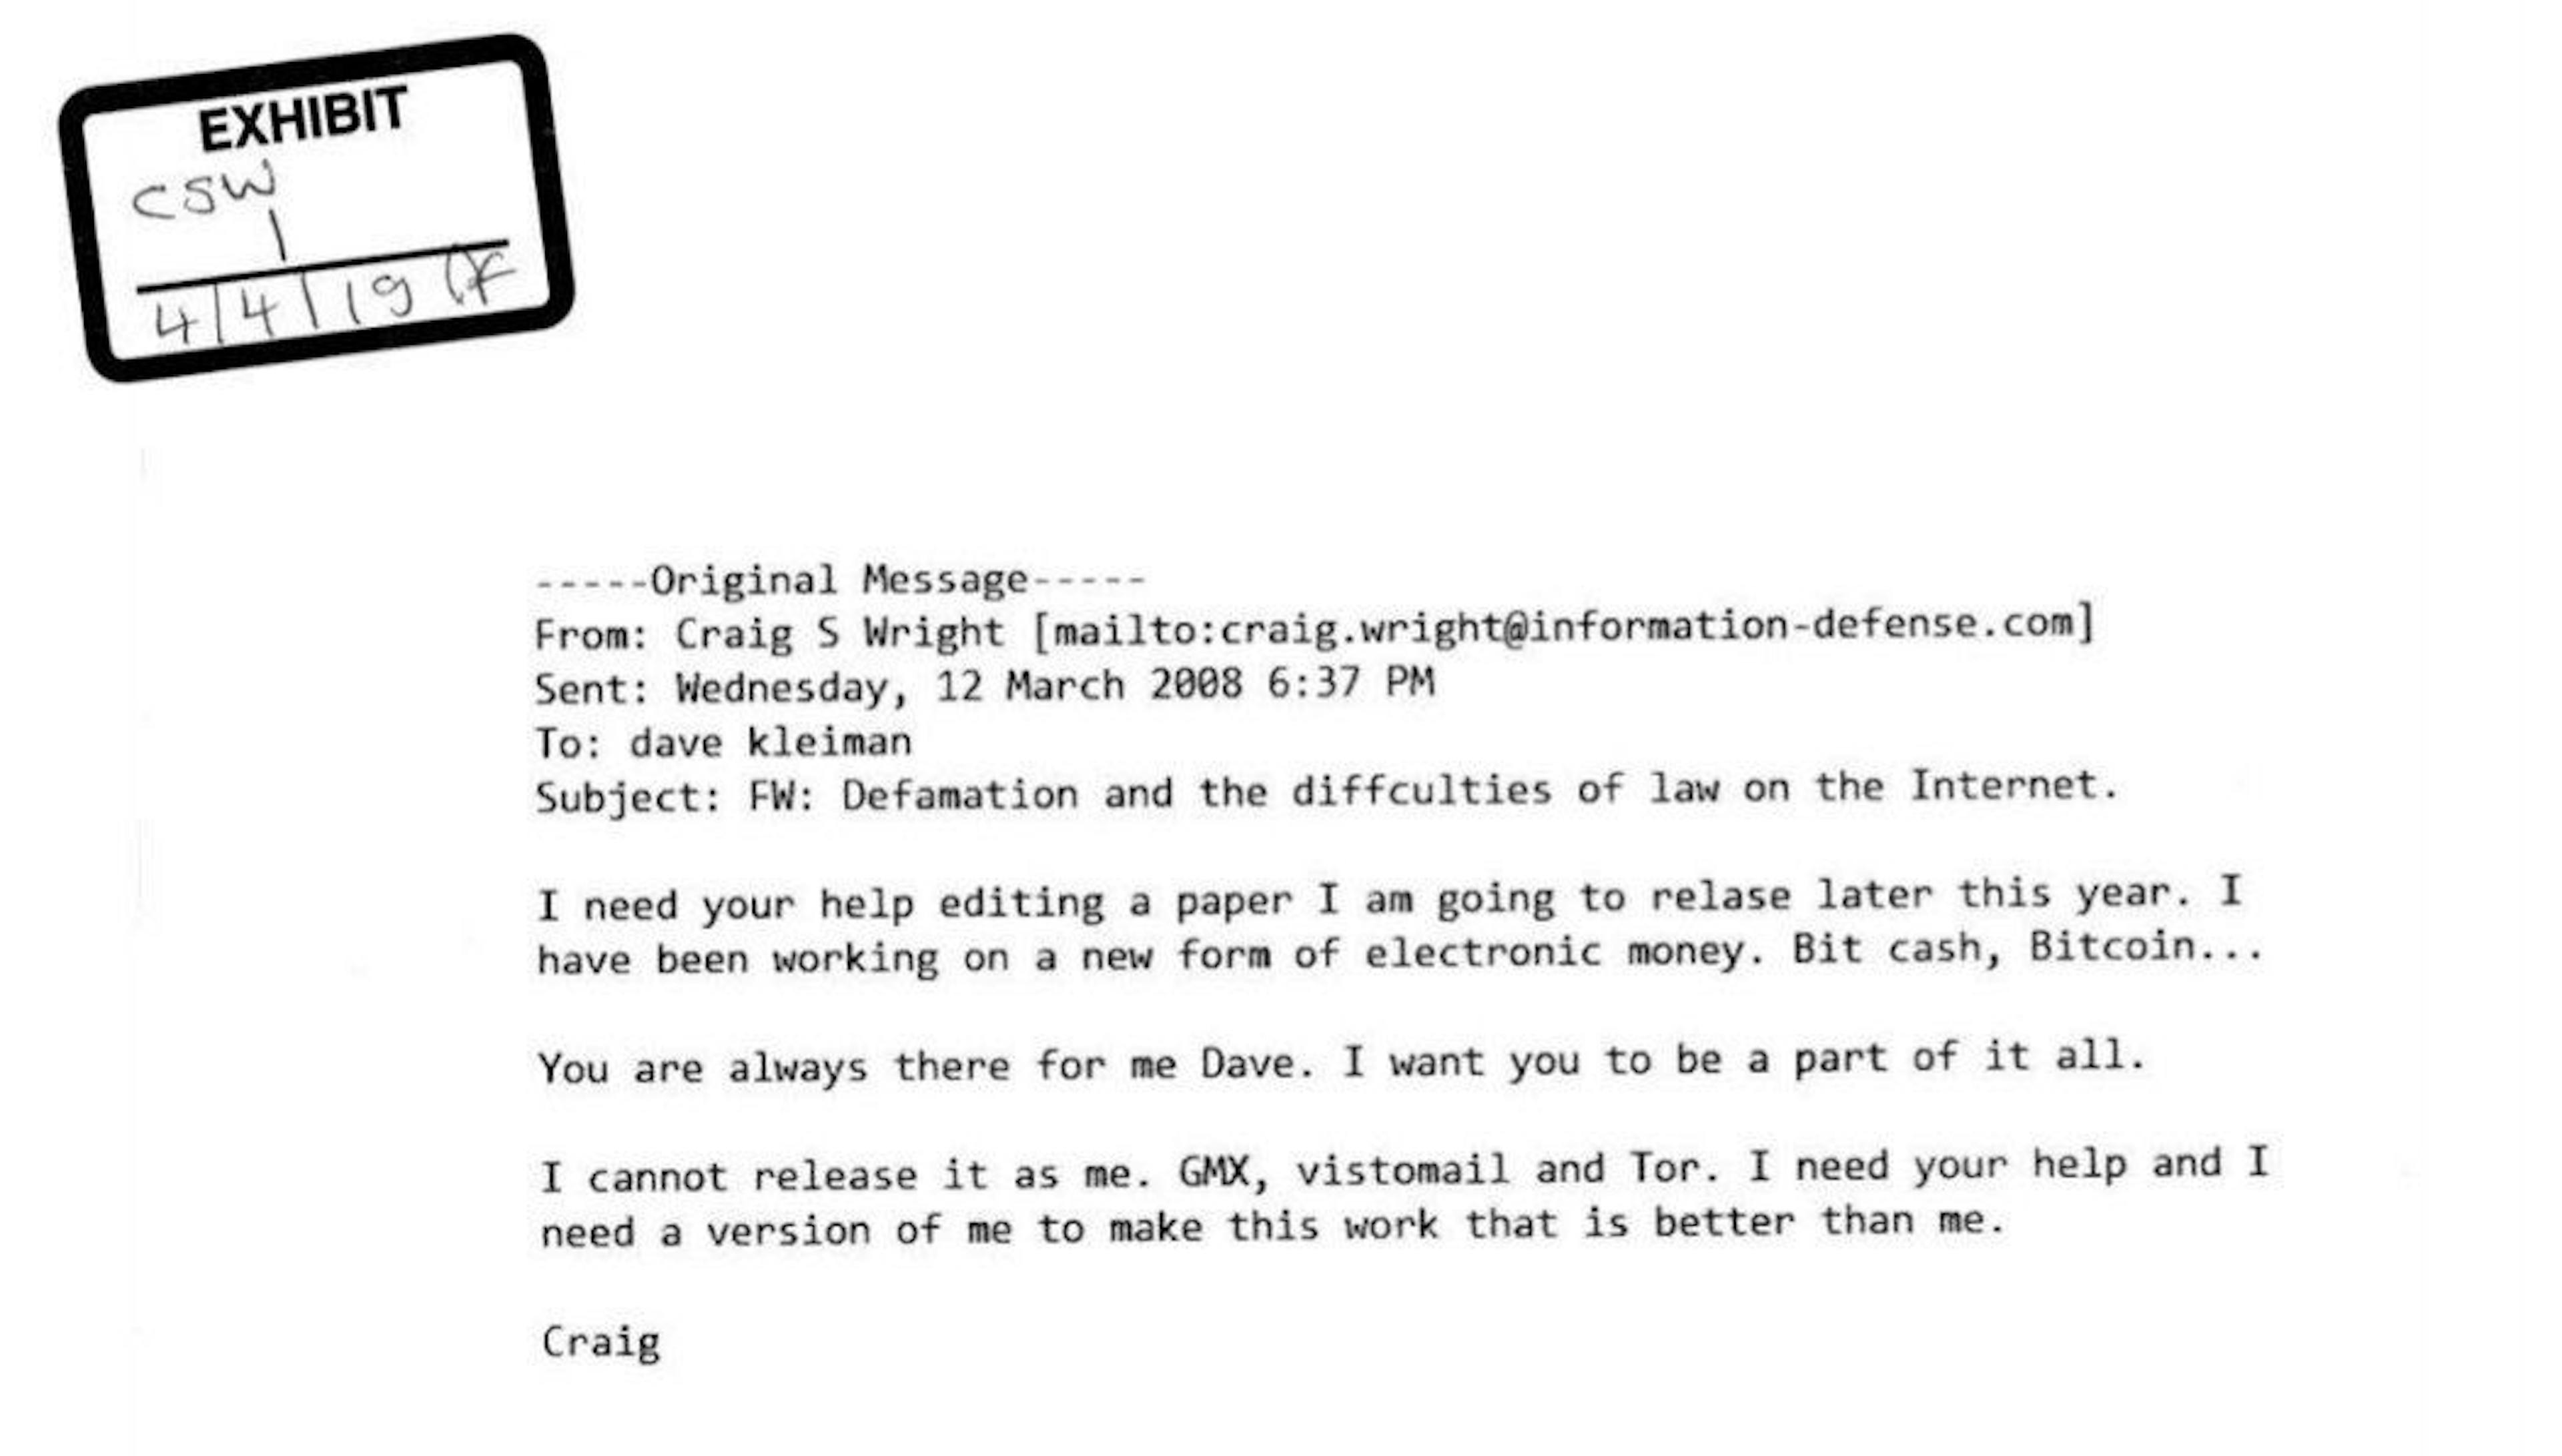 Email forgery created in the 2014/2015 era, backdated to March 12, 2008. One of the reasons this email was found a forgery is because Craig Wright only obtained the information-defence.com domain in Januari 2009. Craig not misspelling Bitcoin like he did in August 2011 (see “The Year 2011” section) when he first discovered Satoshi’s cryptocurrency project is a fun detail. But the icing on the cake is that the real Satoshi Nakamoto did not even have the name ‘Bitcoin’ in mind at this point in time.